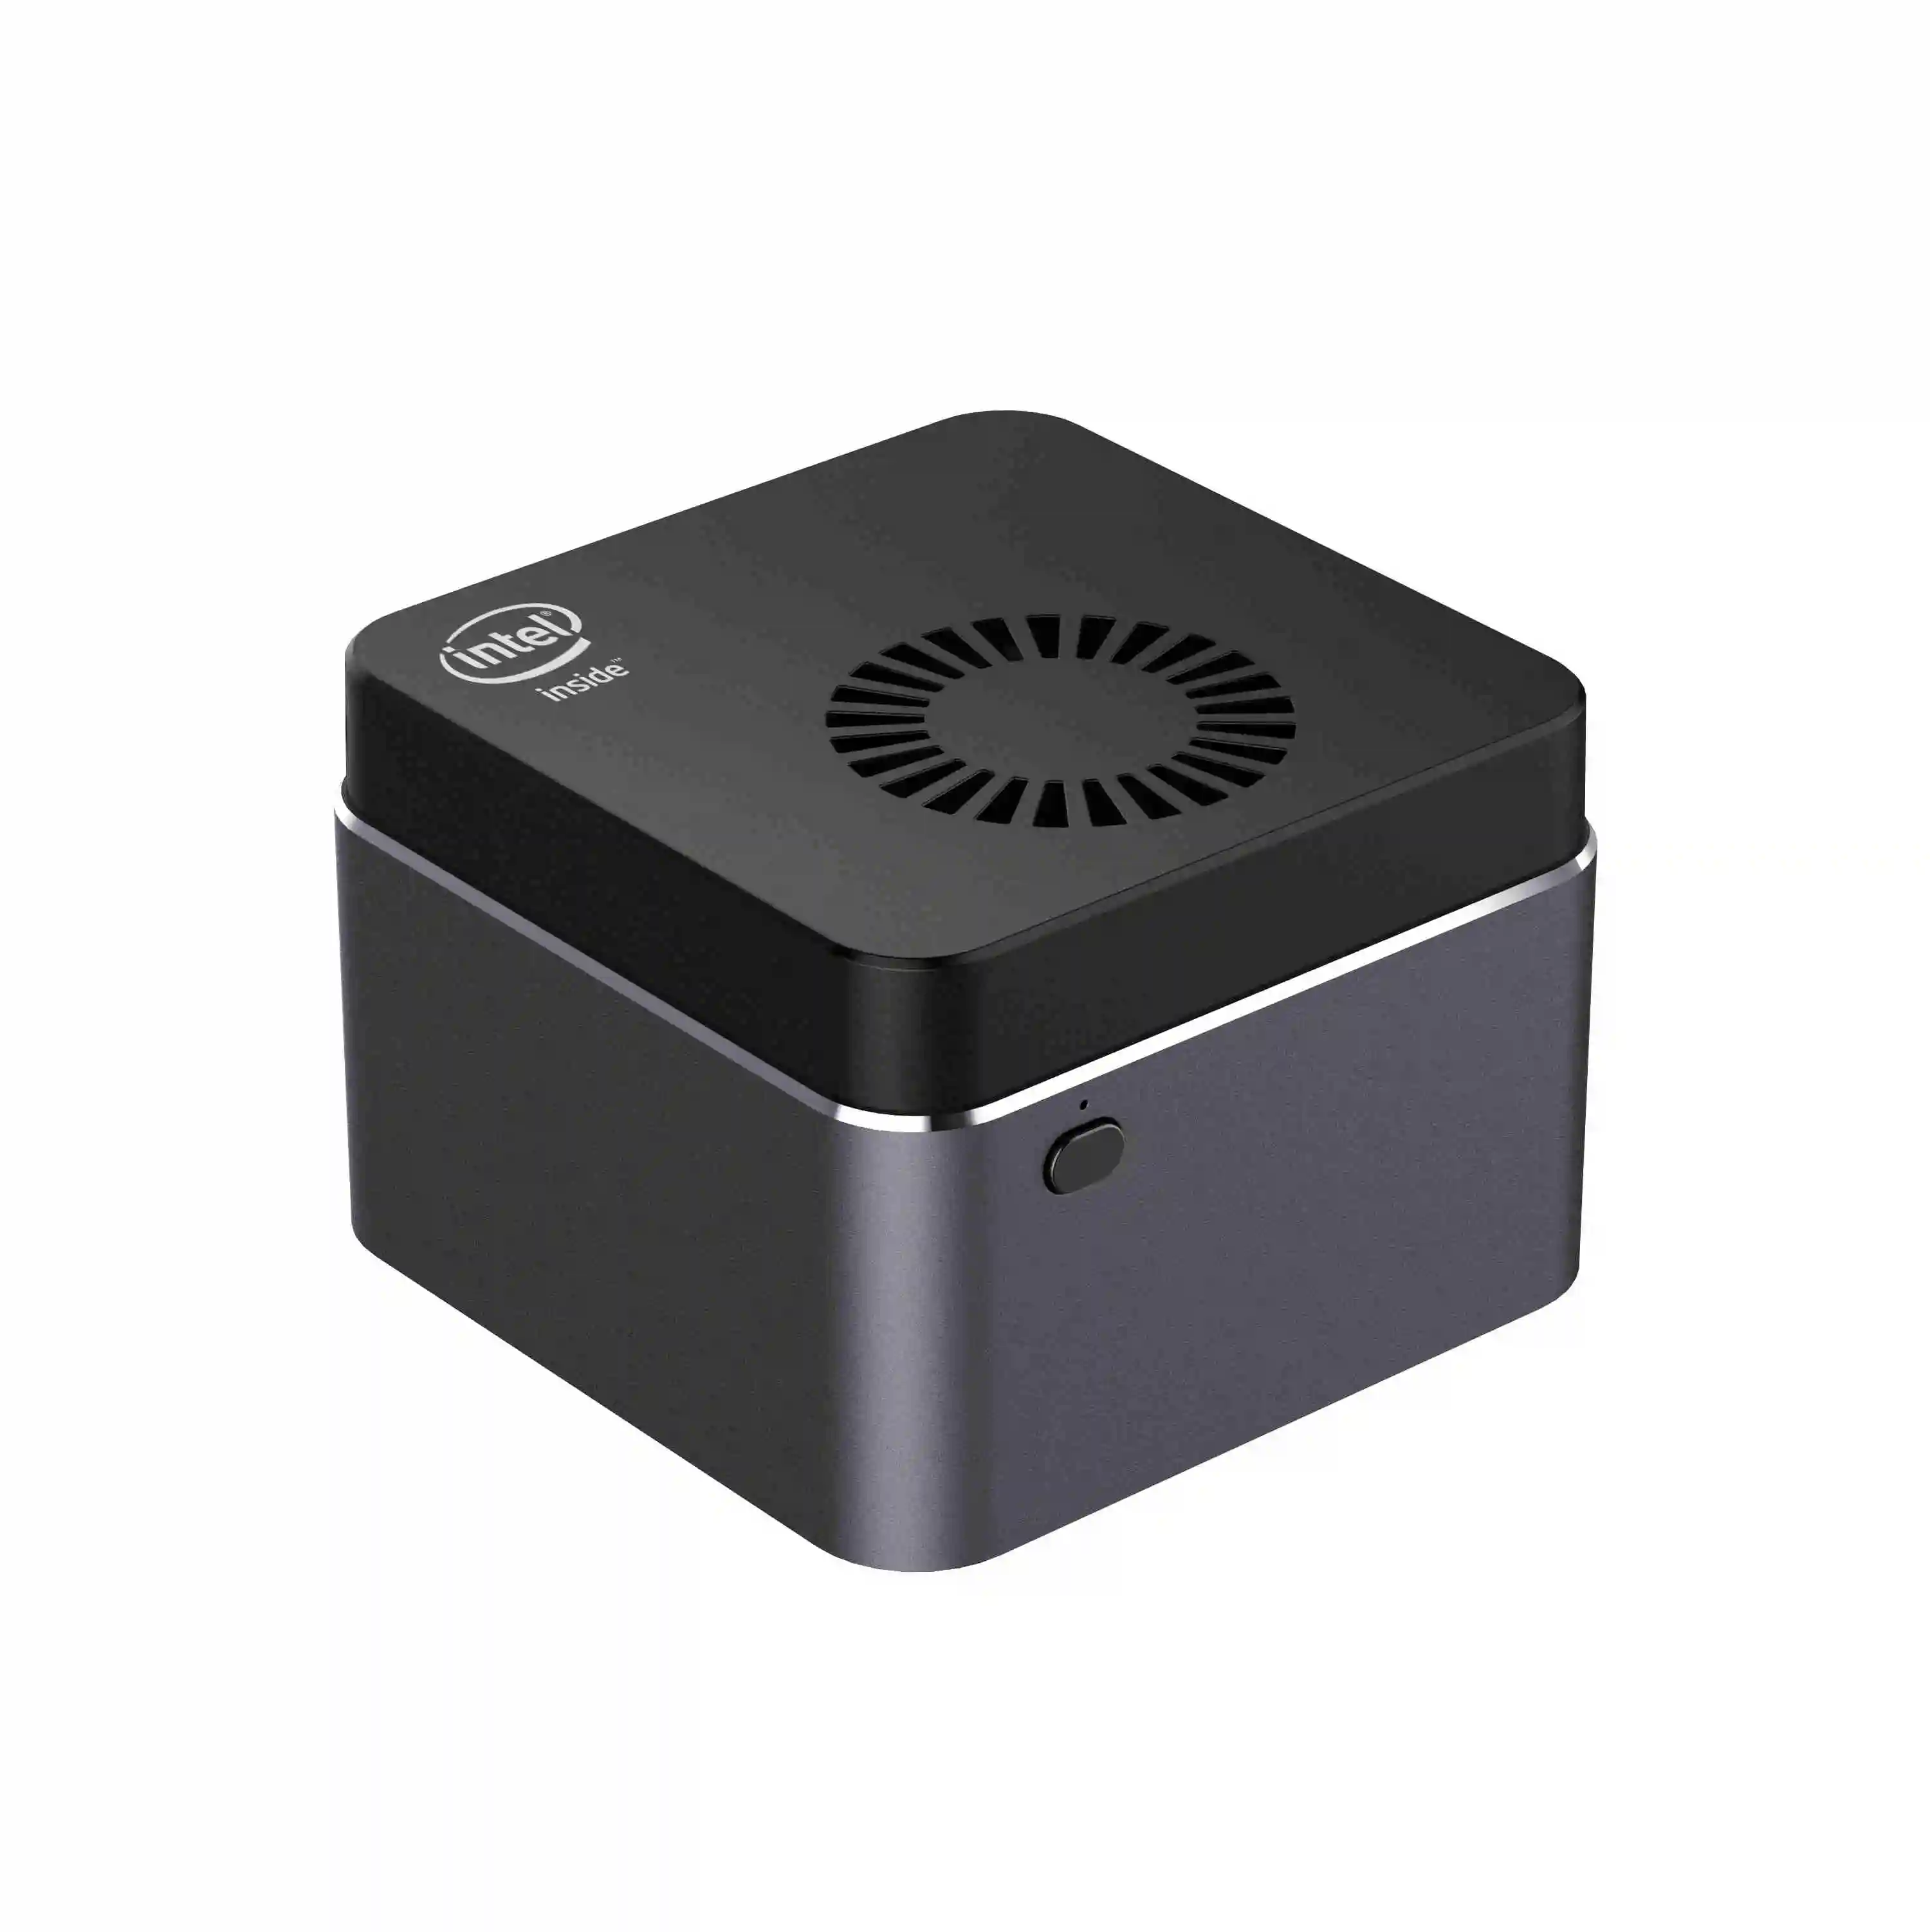 

M1T Mini PC With LAN Port Win10 Win11 Linux Celeron J4125 8G 128G/256G/512G/IT Dual WIFI 2.4G+5.8G USB3.0 BT4.2 Mini Computer